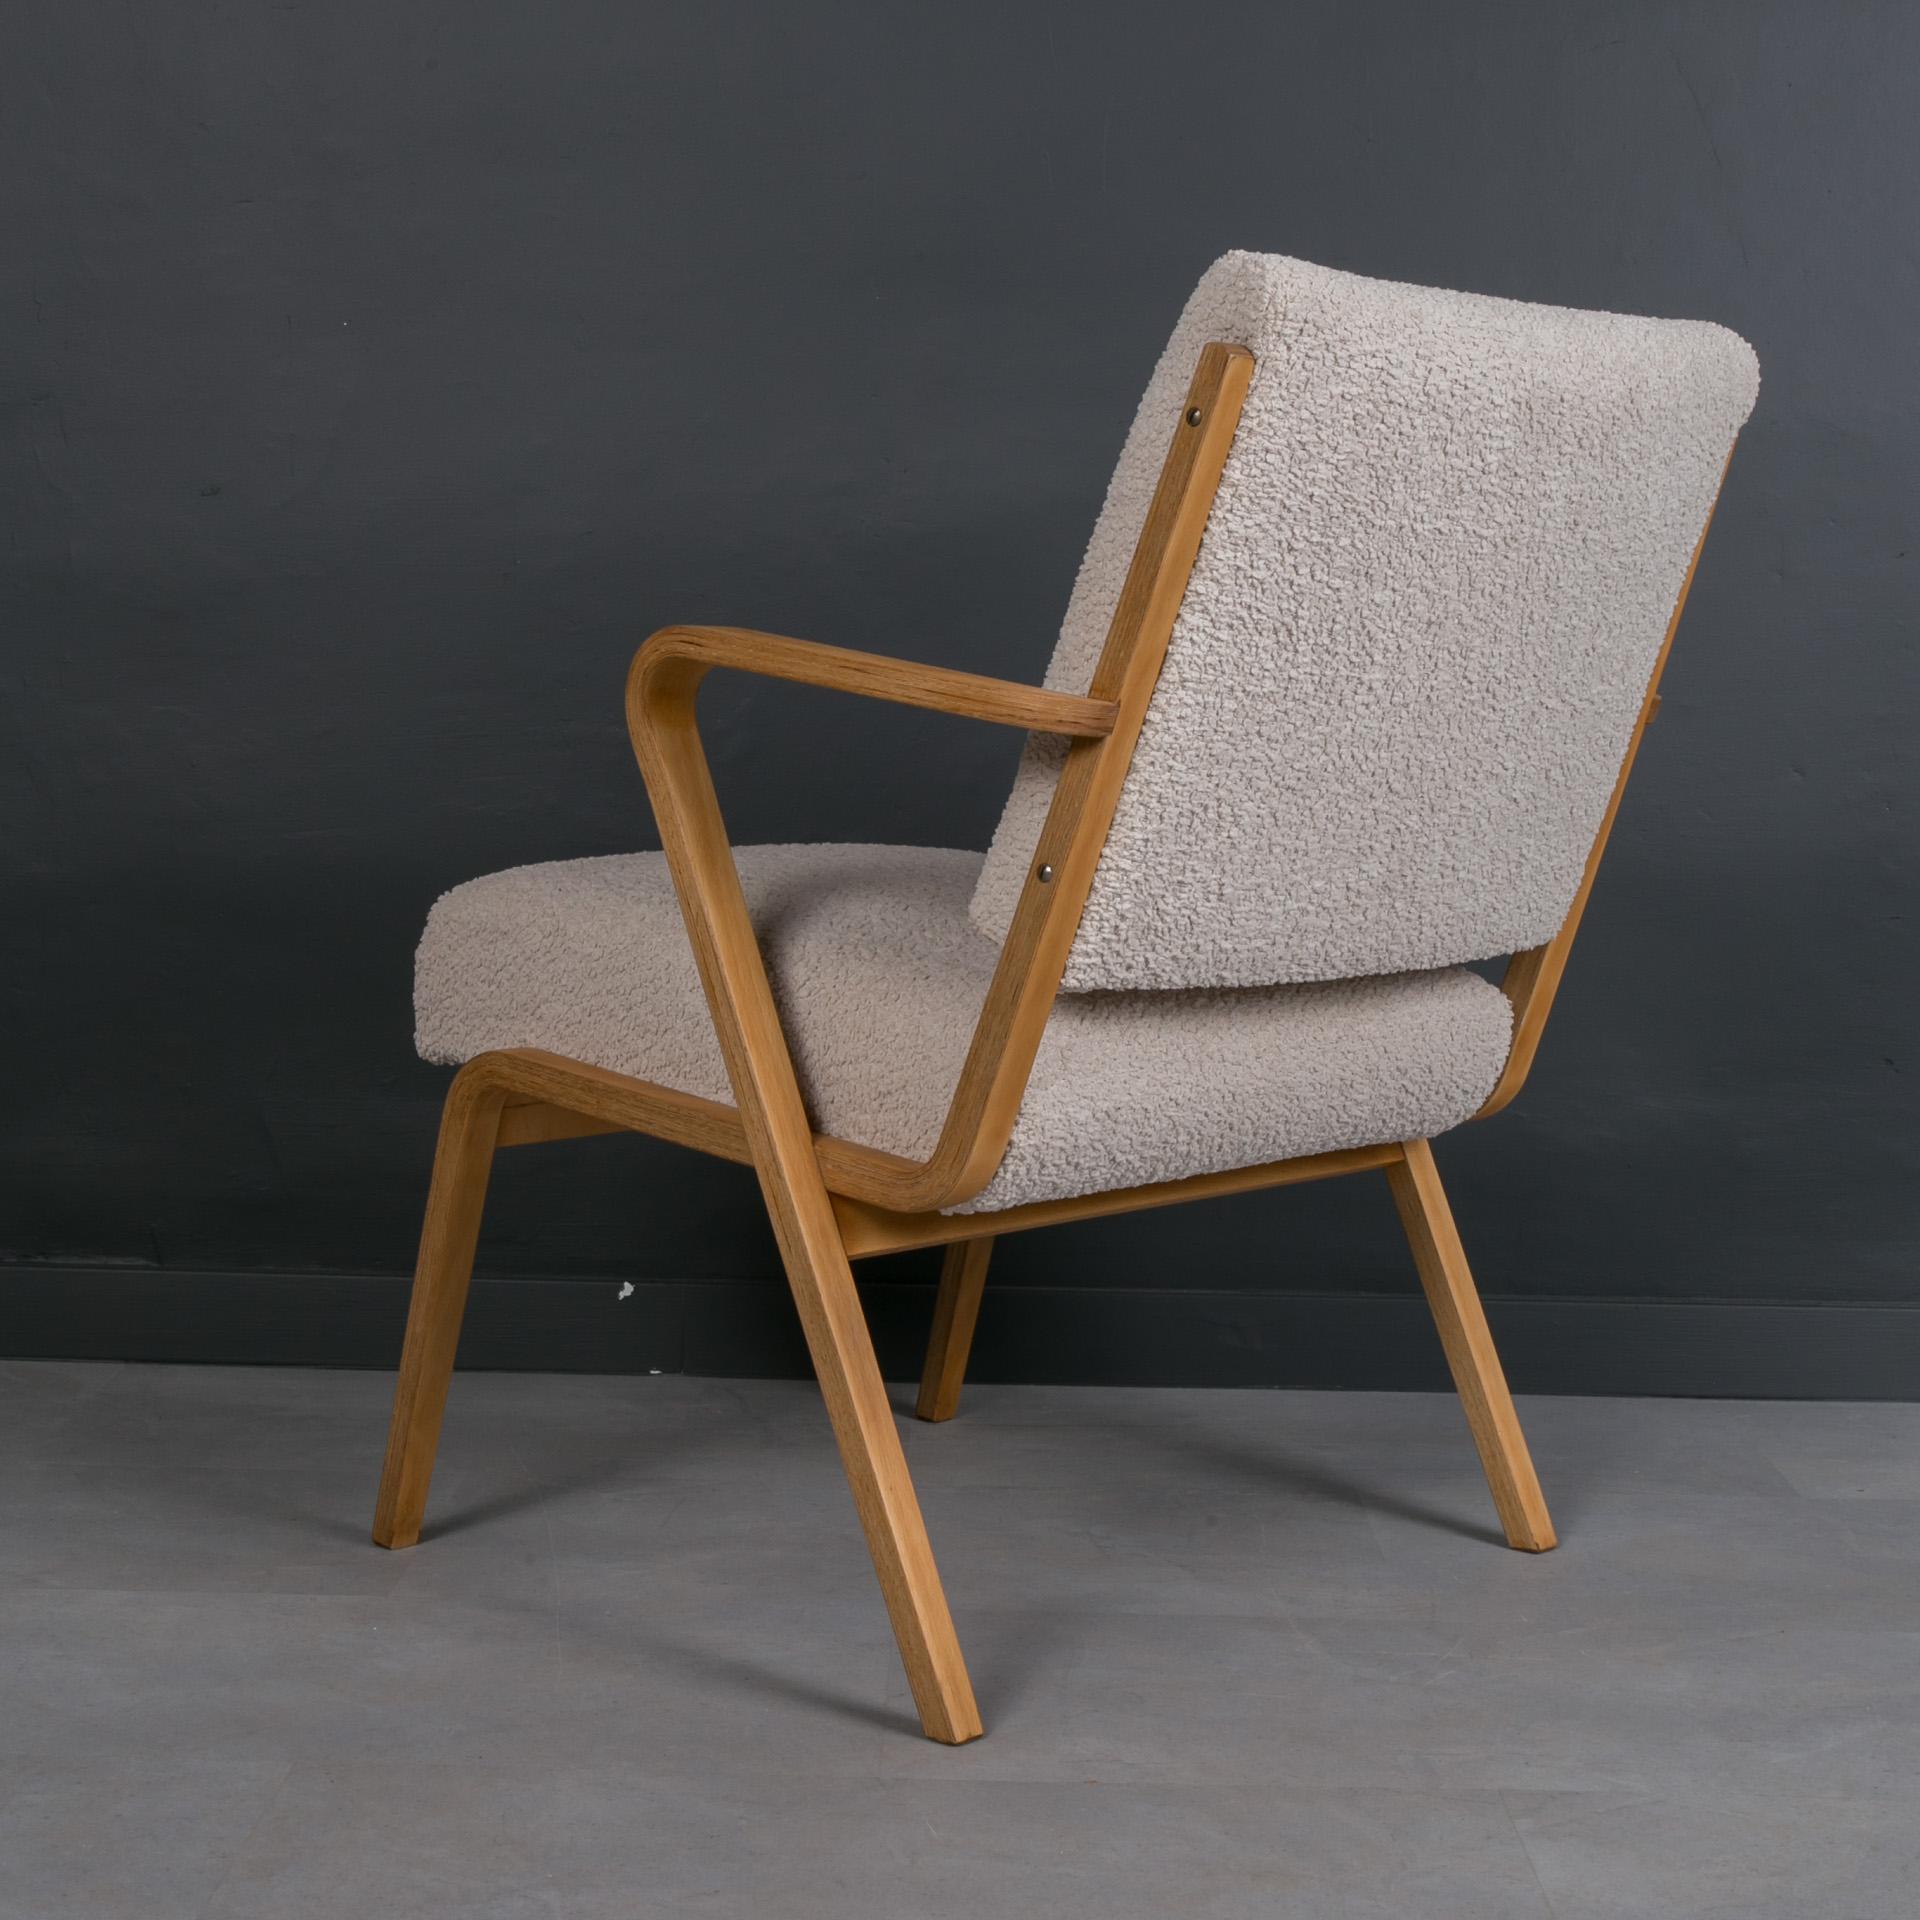 Upholstery Set of Two Lounge Chairs by S. Selmanagić, 1960s, Reupholstered in Creamy Boucle For Sale